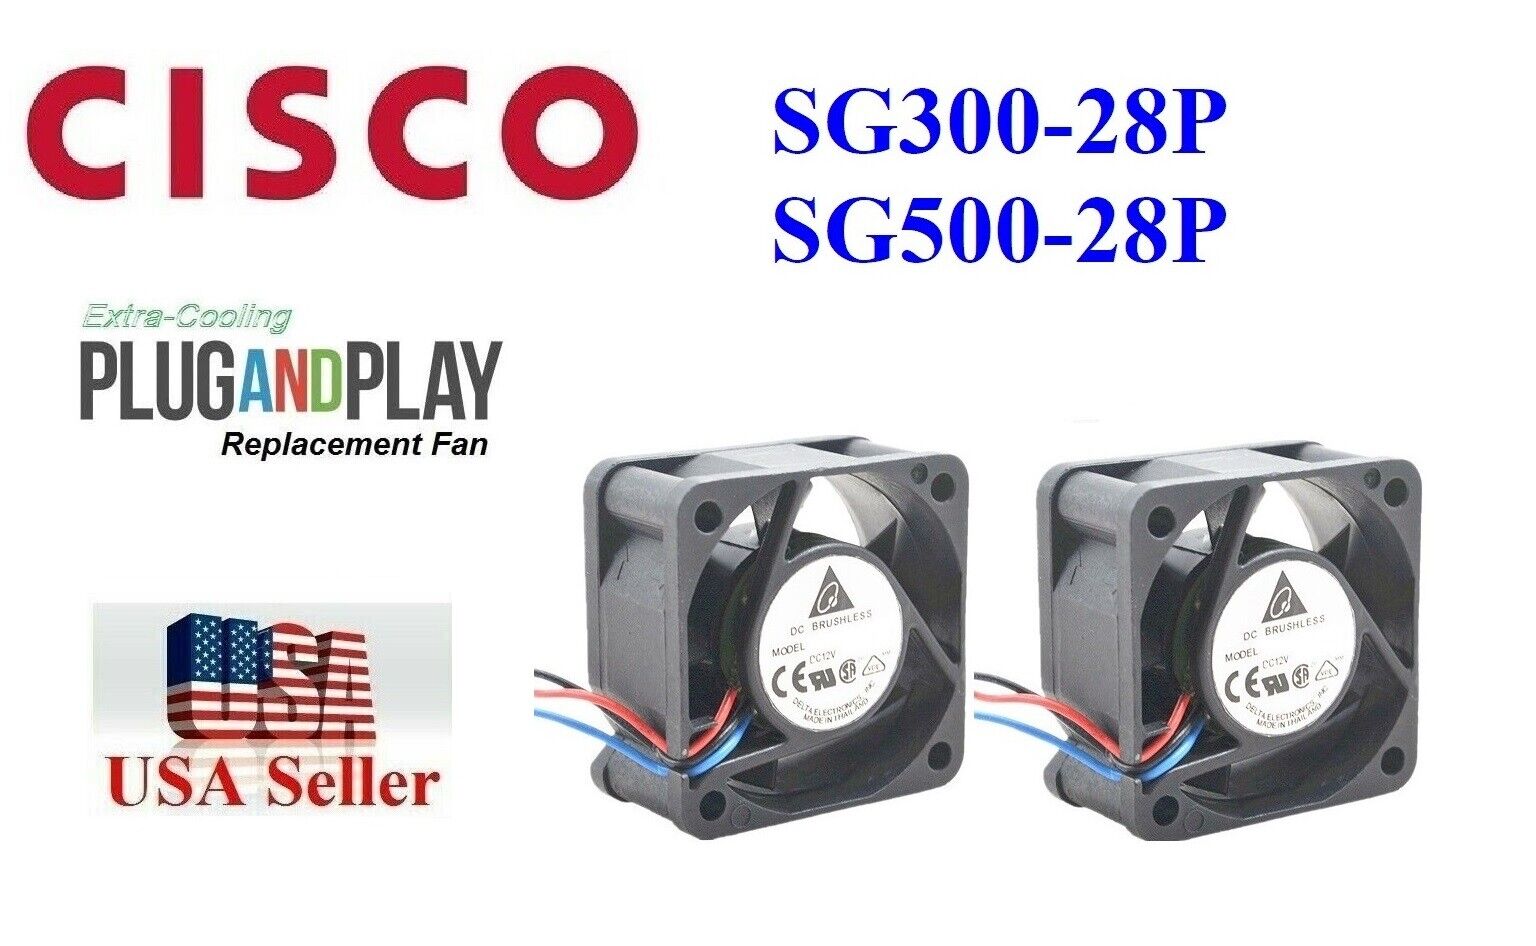 2x New Replacement Fans for CISCO SG300-28P, SG500-28P